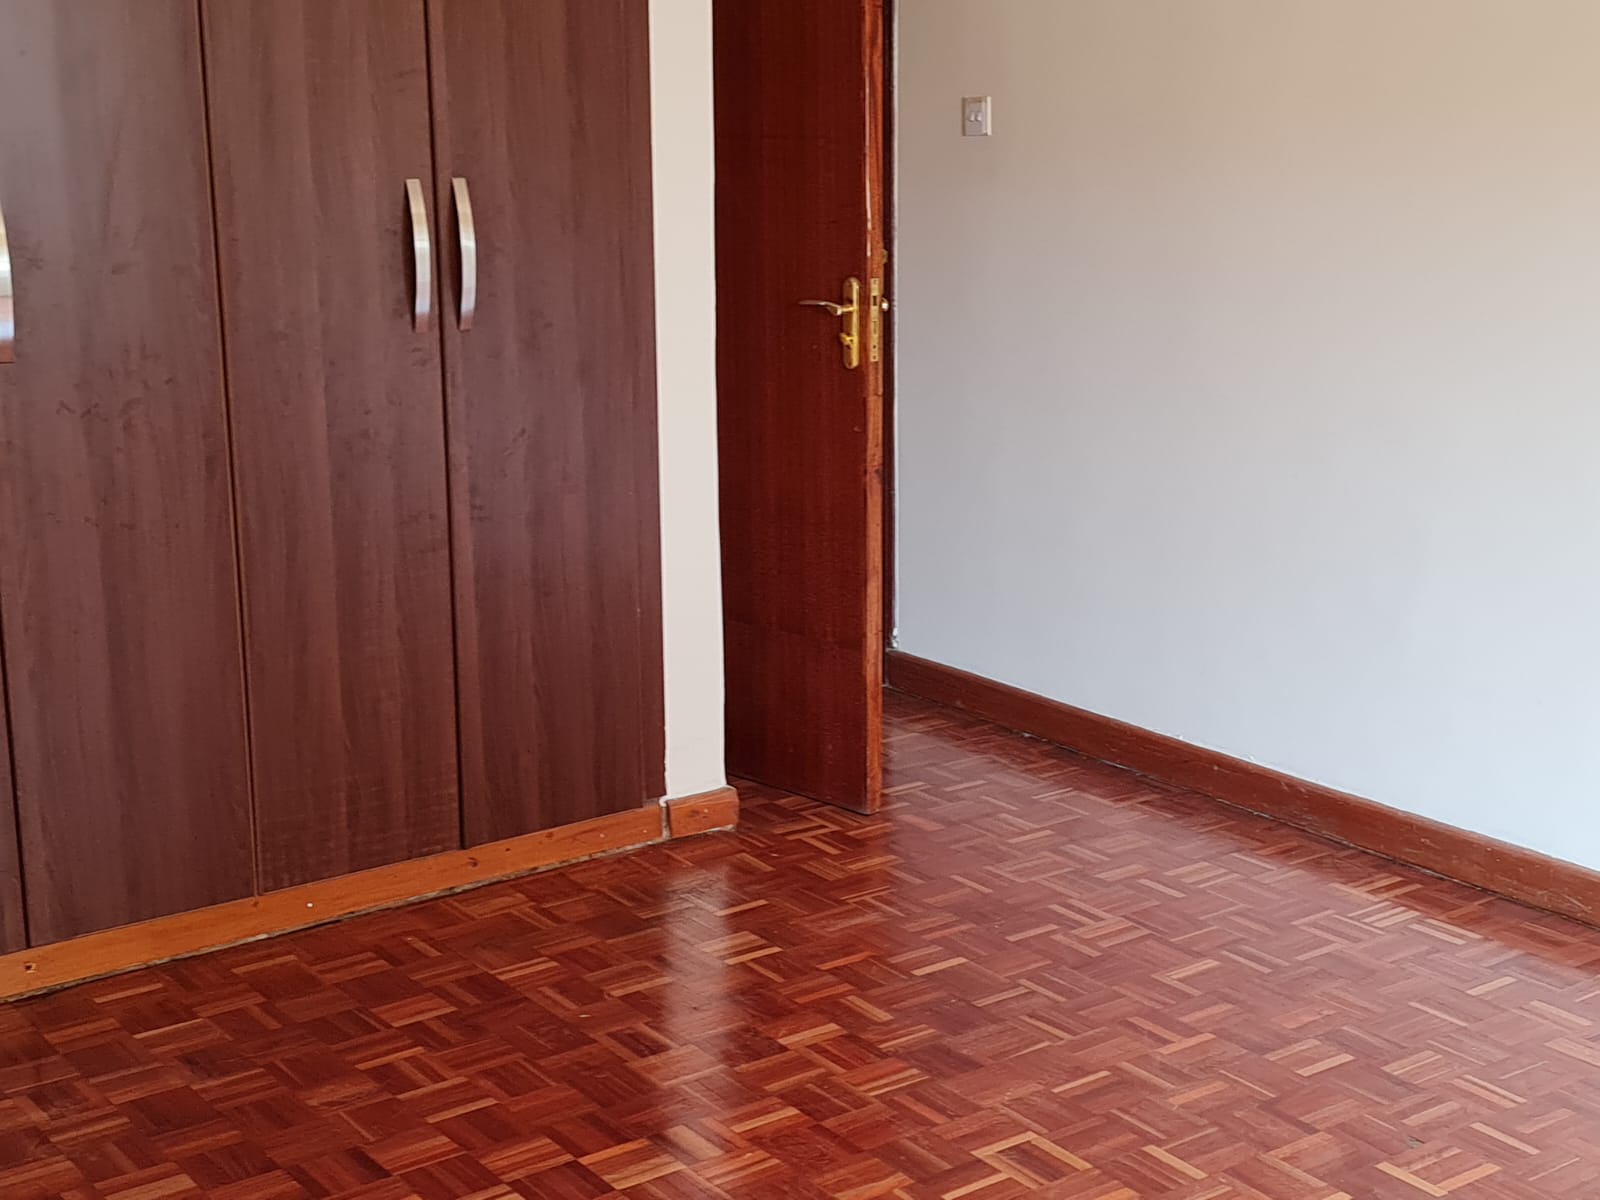 Newly Renovated Spacious 4 Bedroom Apartment for Rent at Ksh95k in Westlands, Raphta Road (13)